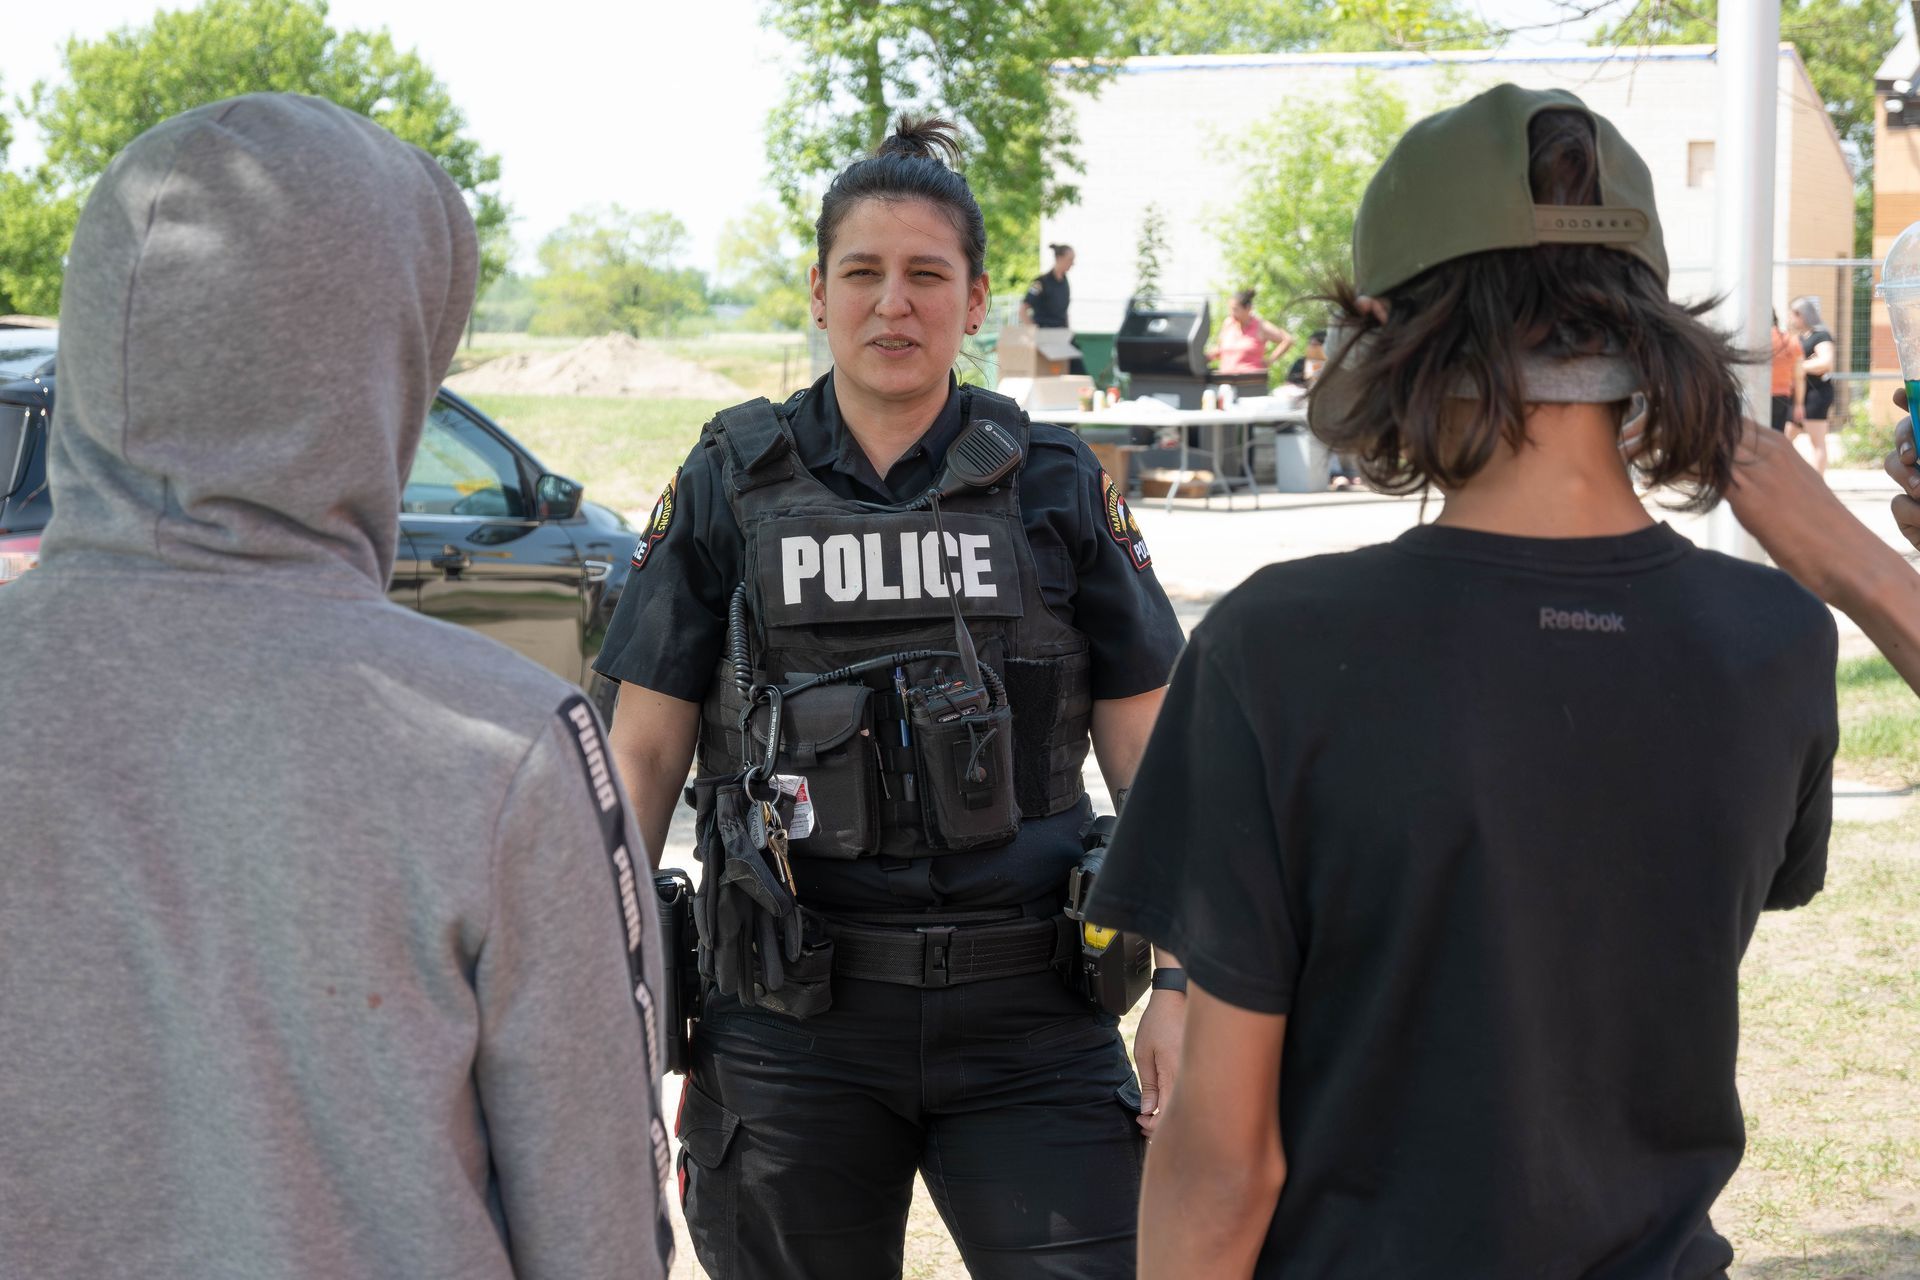 MFNPS-Manitoba First Nations Police Service Officer working in the community